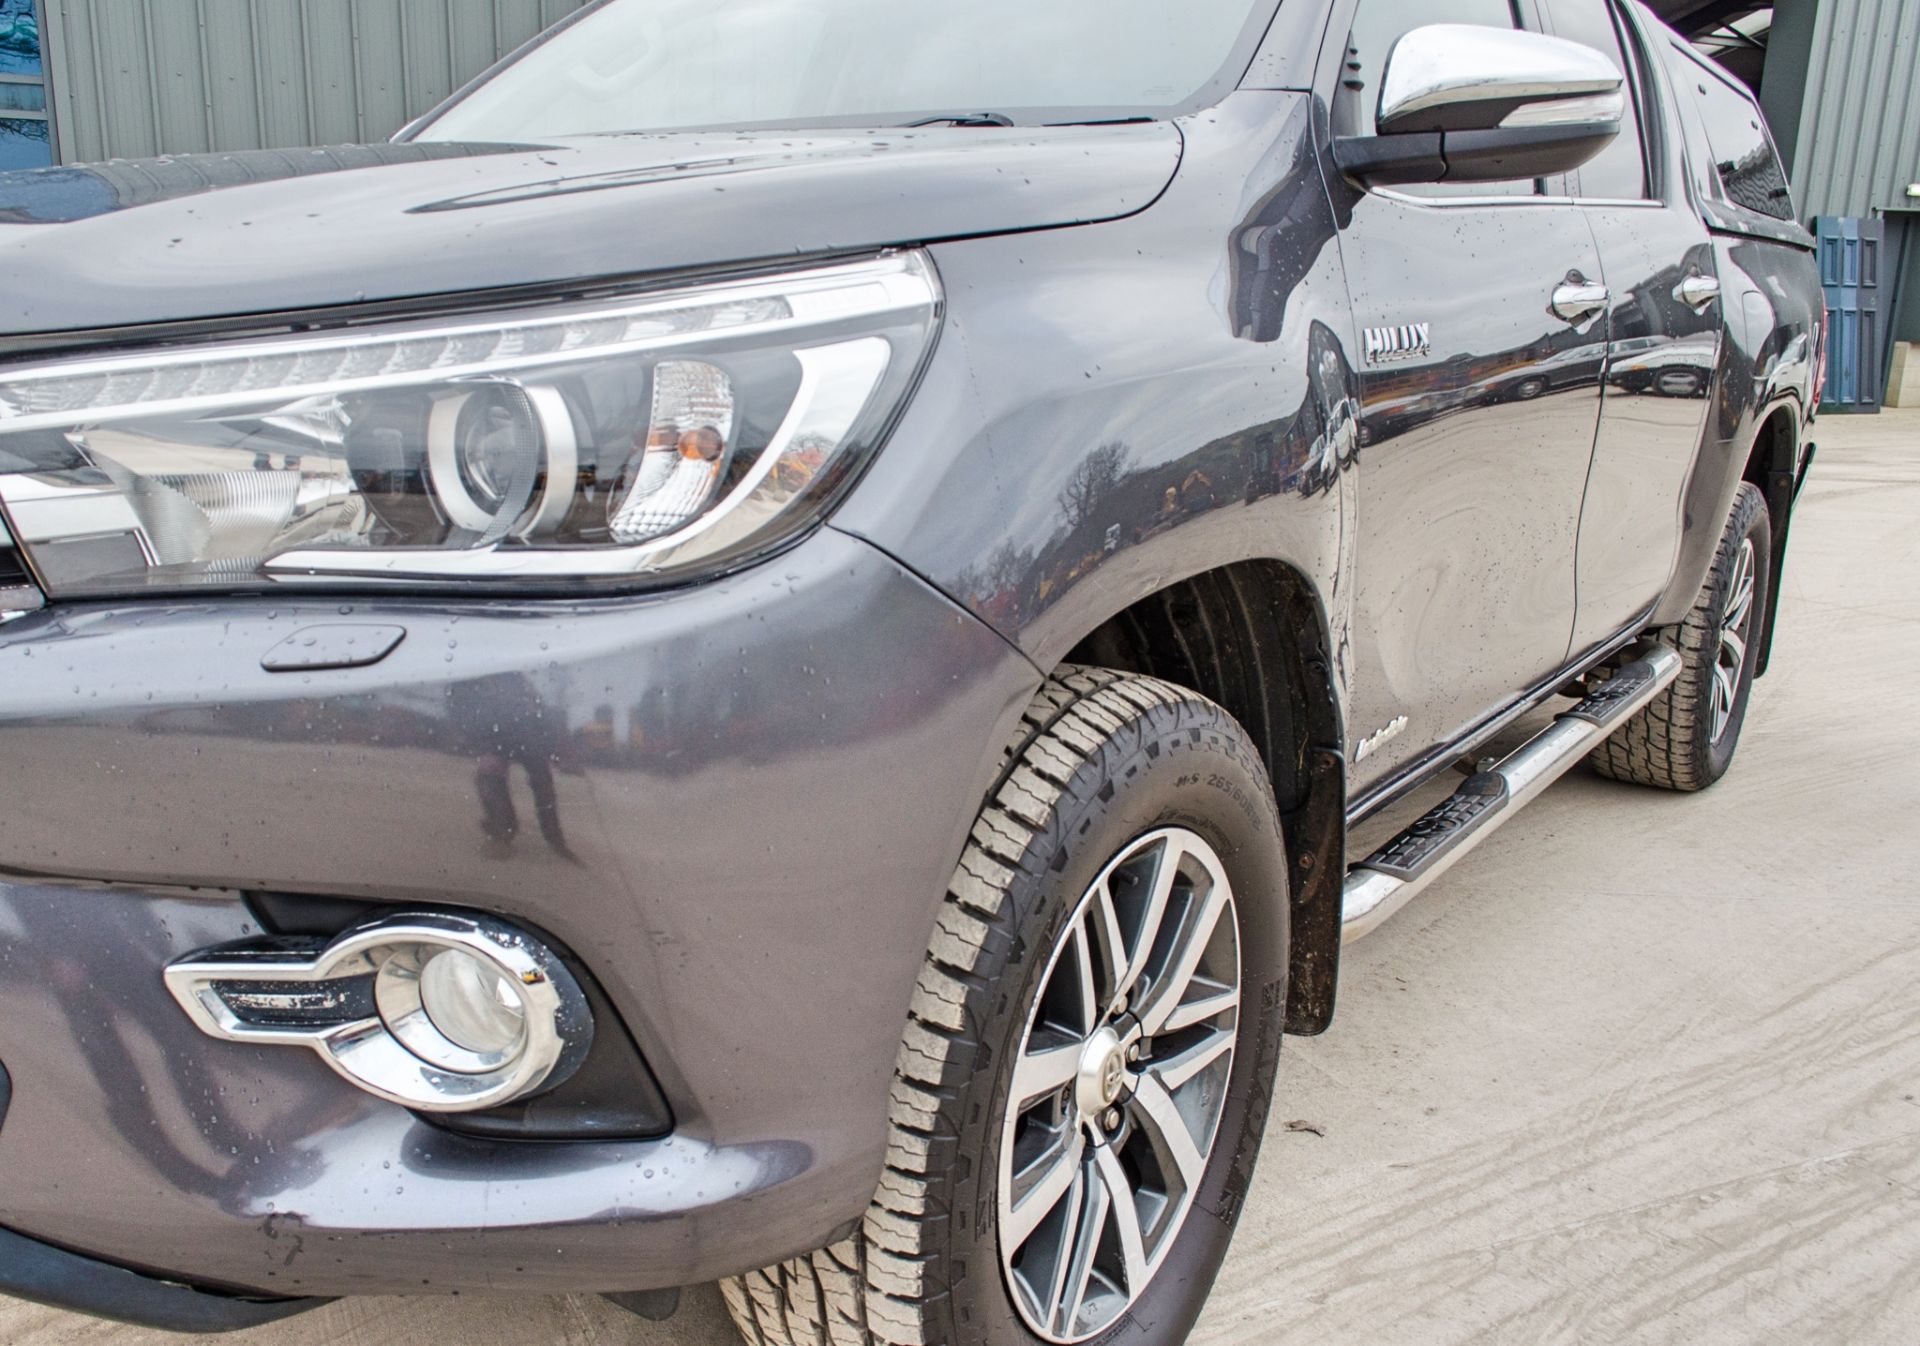 Toyota Hilux Invincible D-4D 4WD DCB light 4x4 utility vehicle Registration Number: SM17 USS Date of - Image 10 of 33